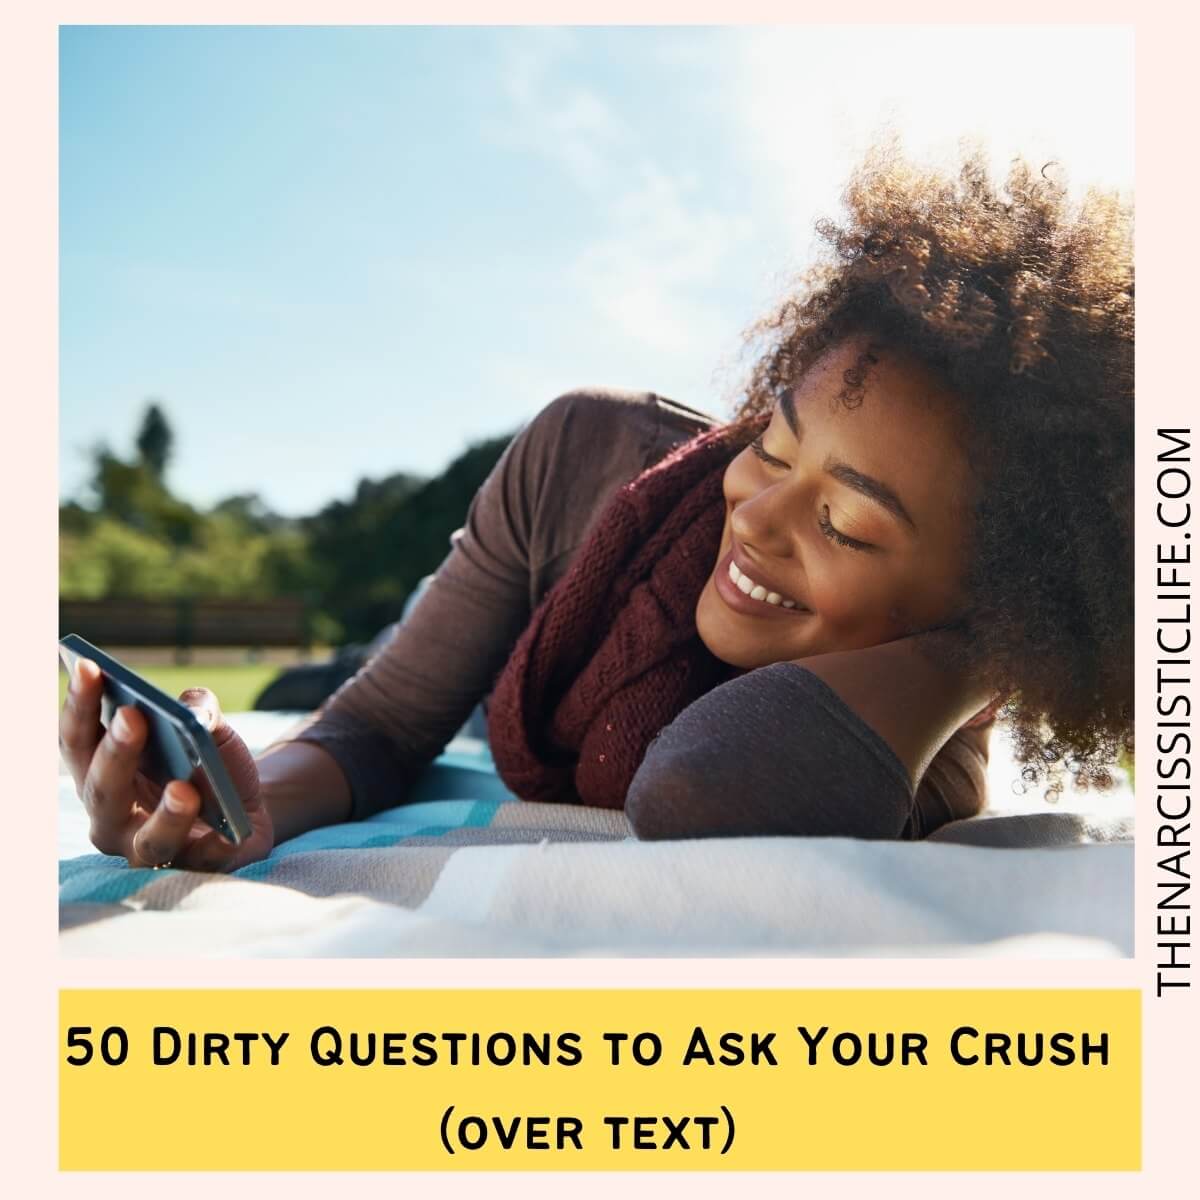 271 Dirty Questions to ask your Crush